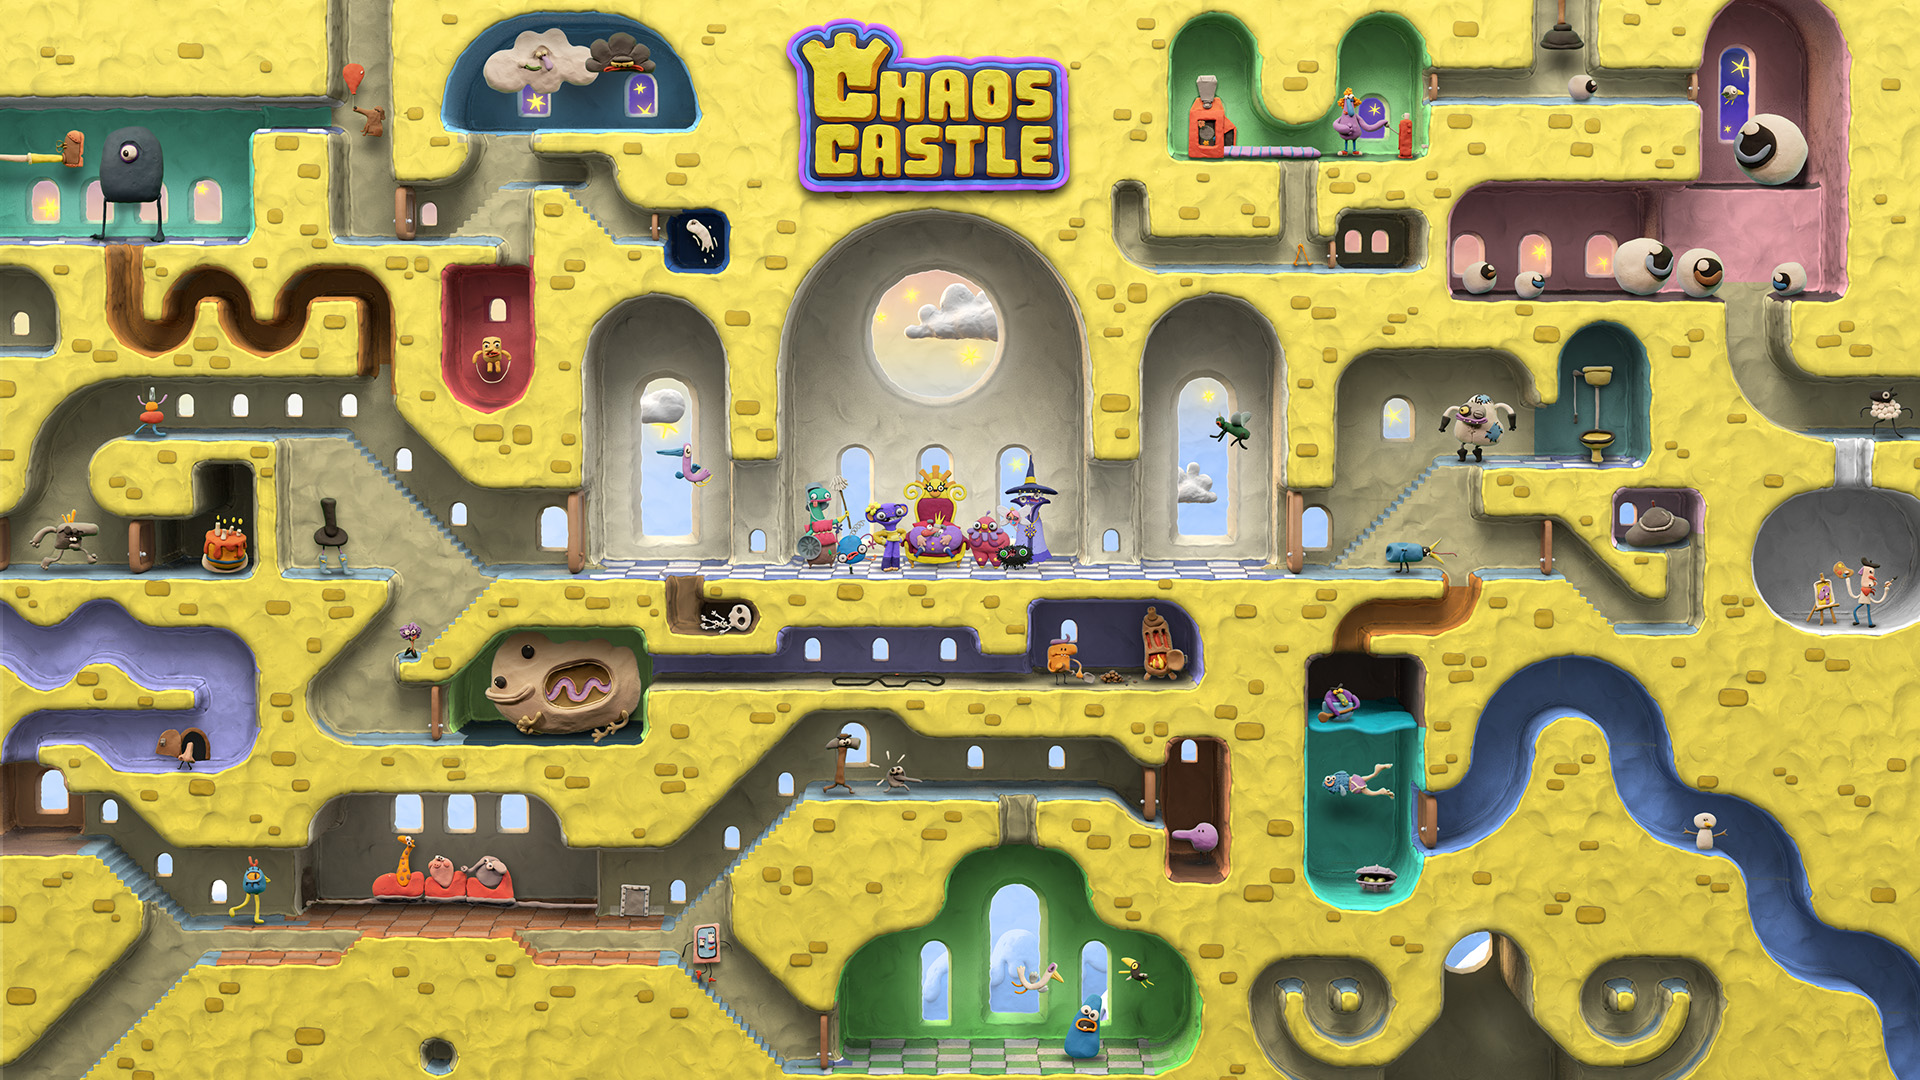 Chaos Castle Combines CG Animation with Plasticine